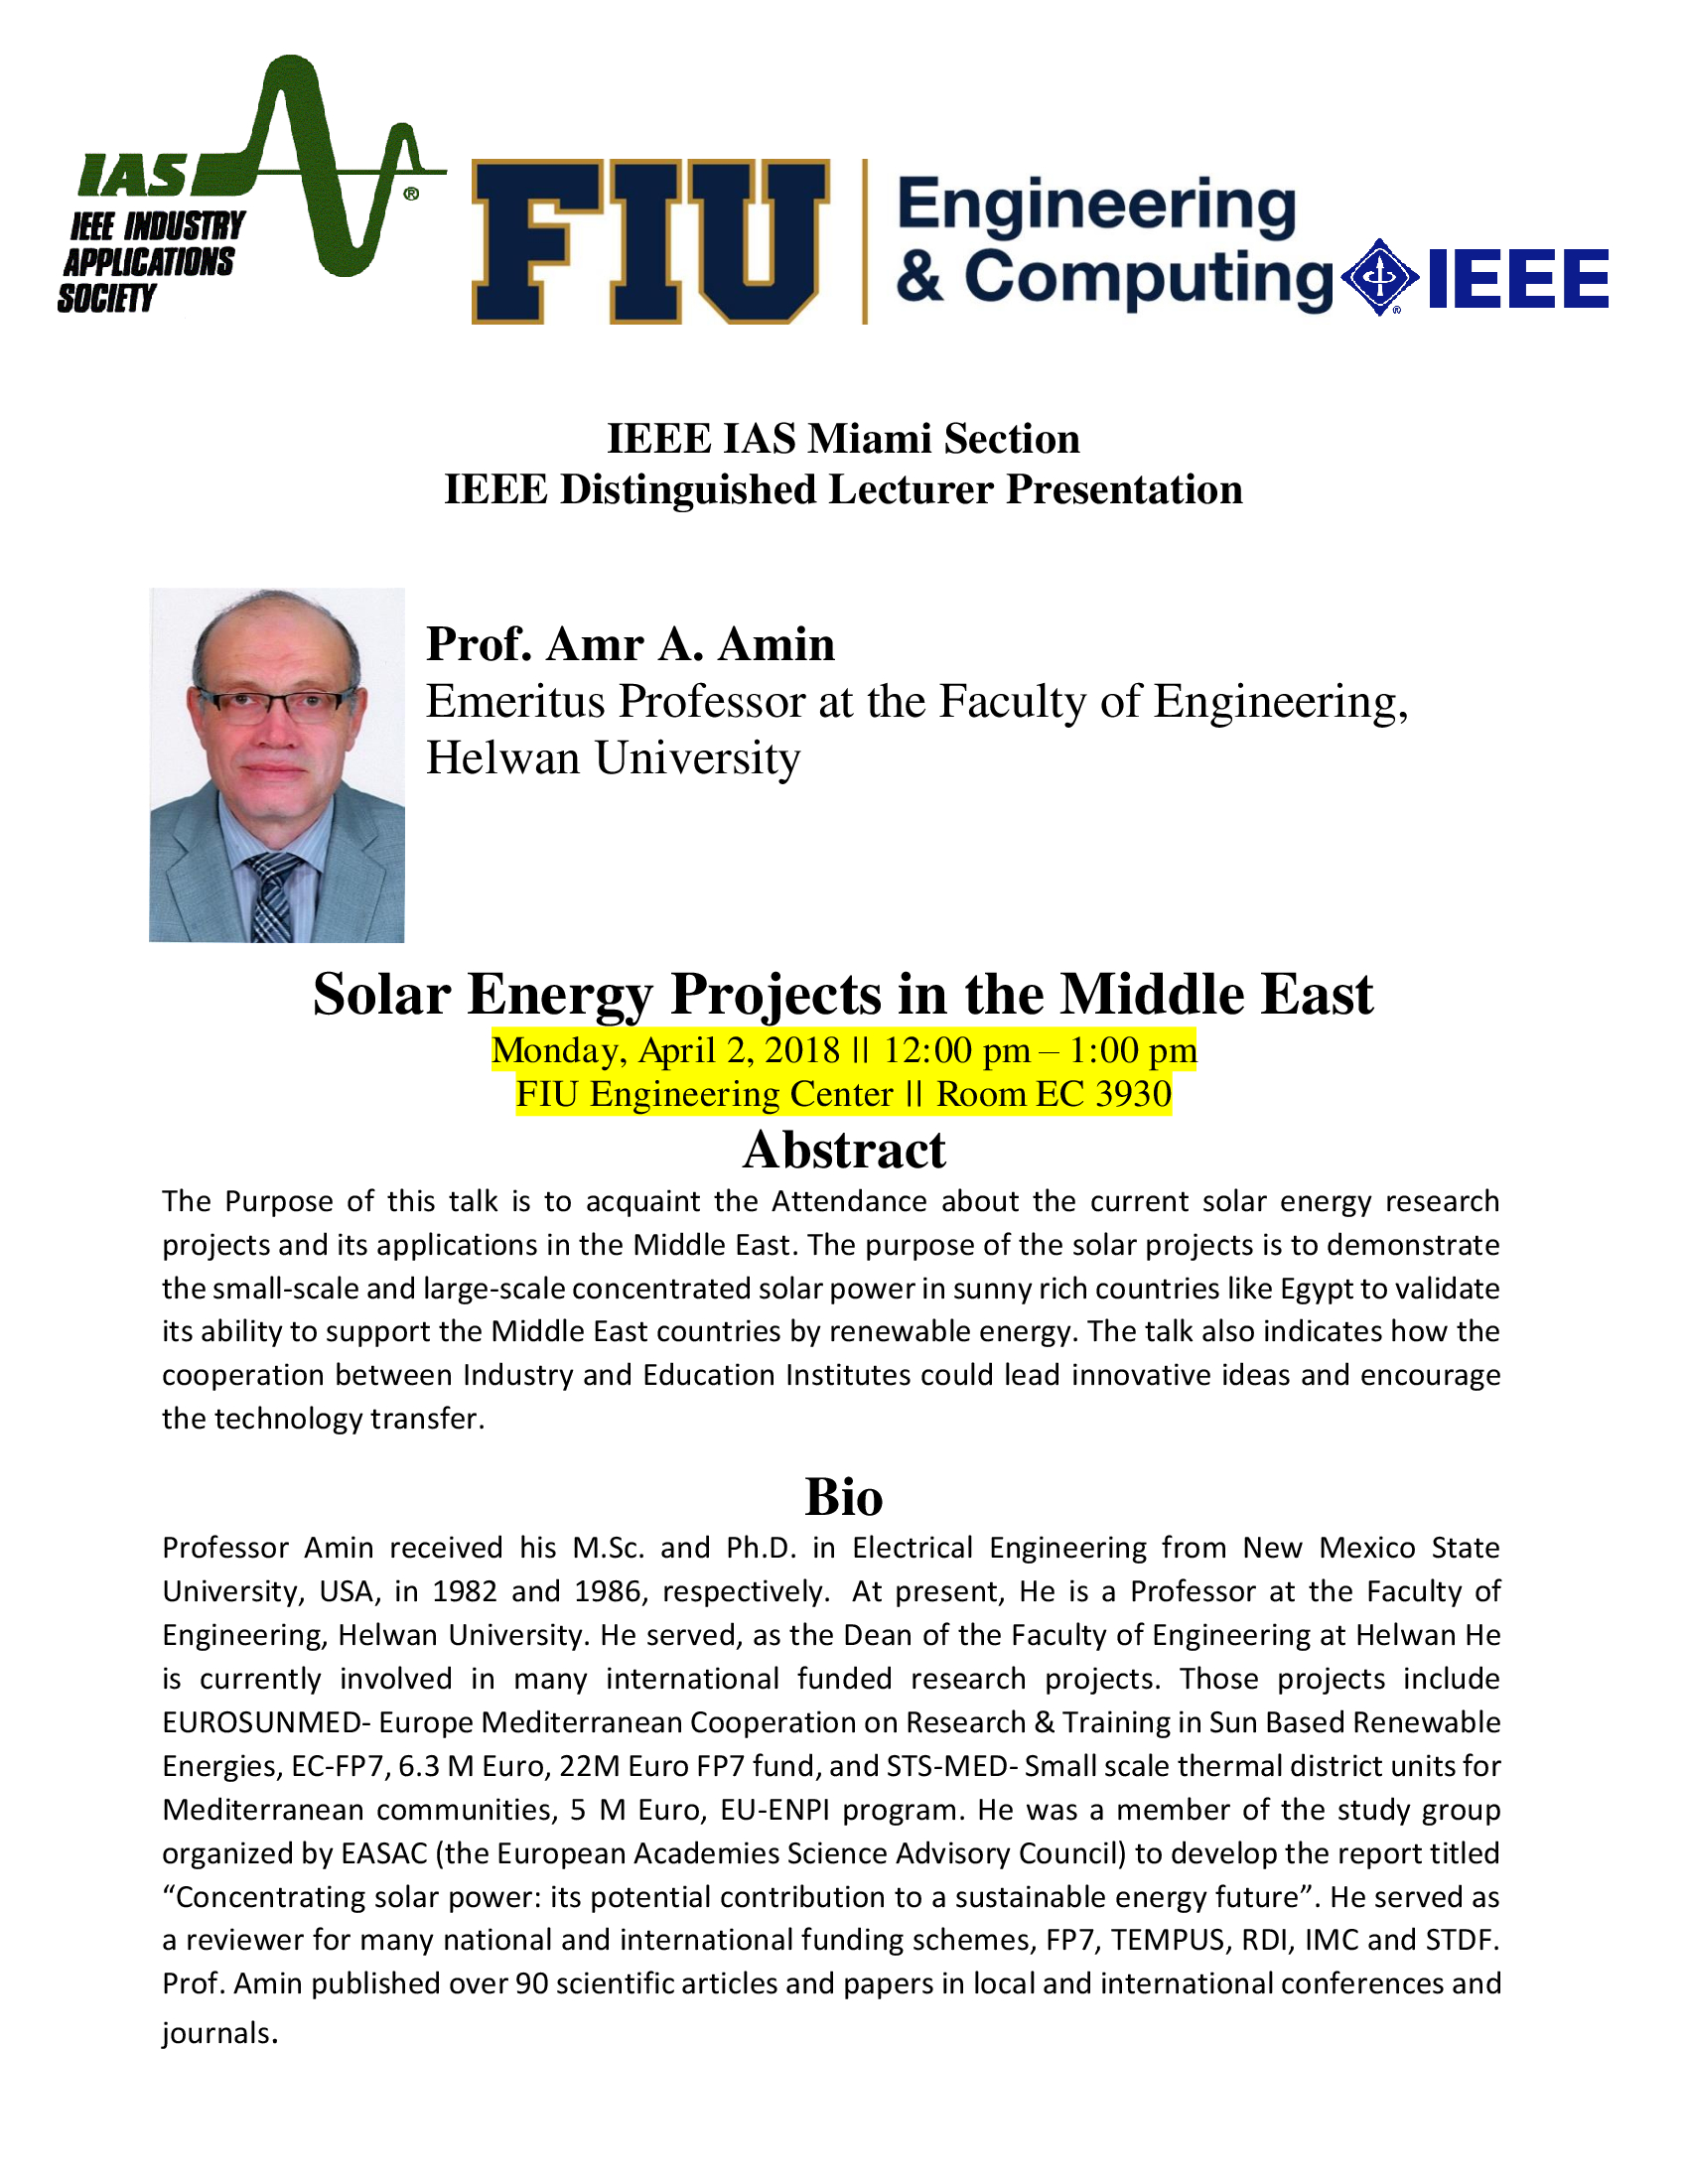 Solar Energy Projects in the Middle East